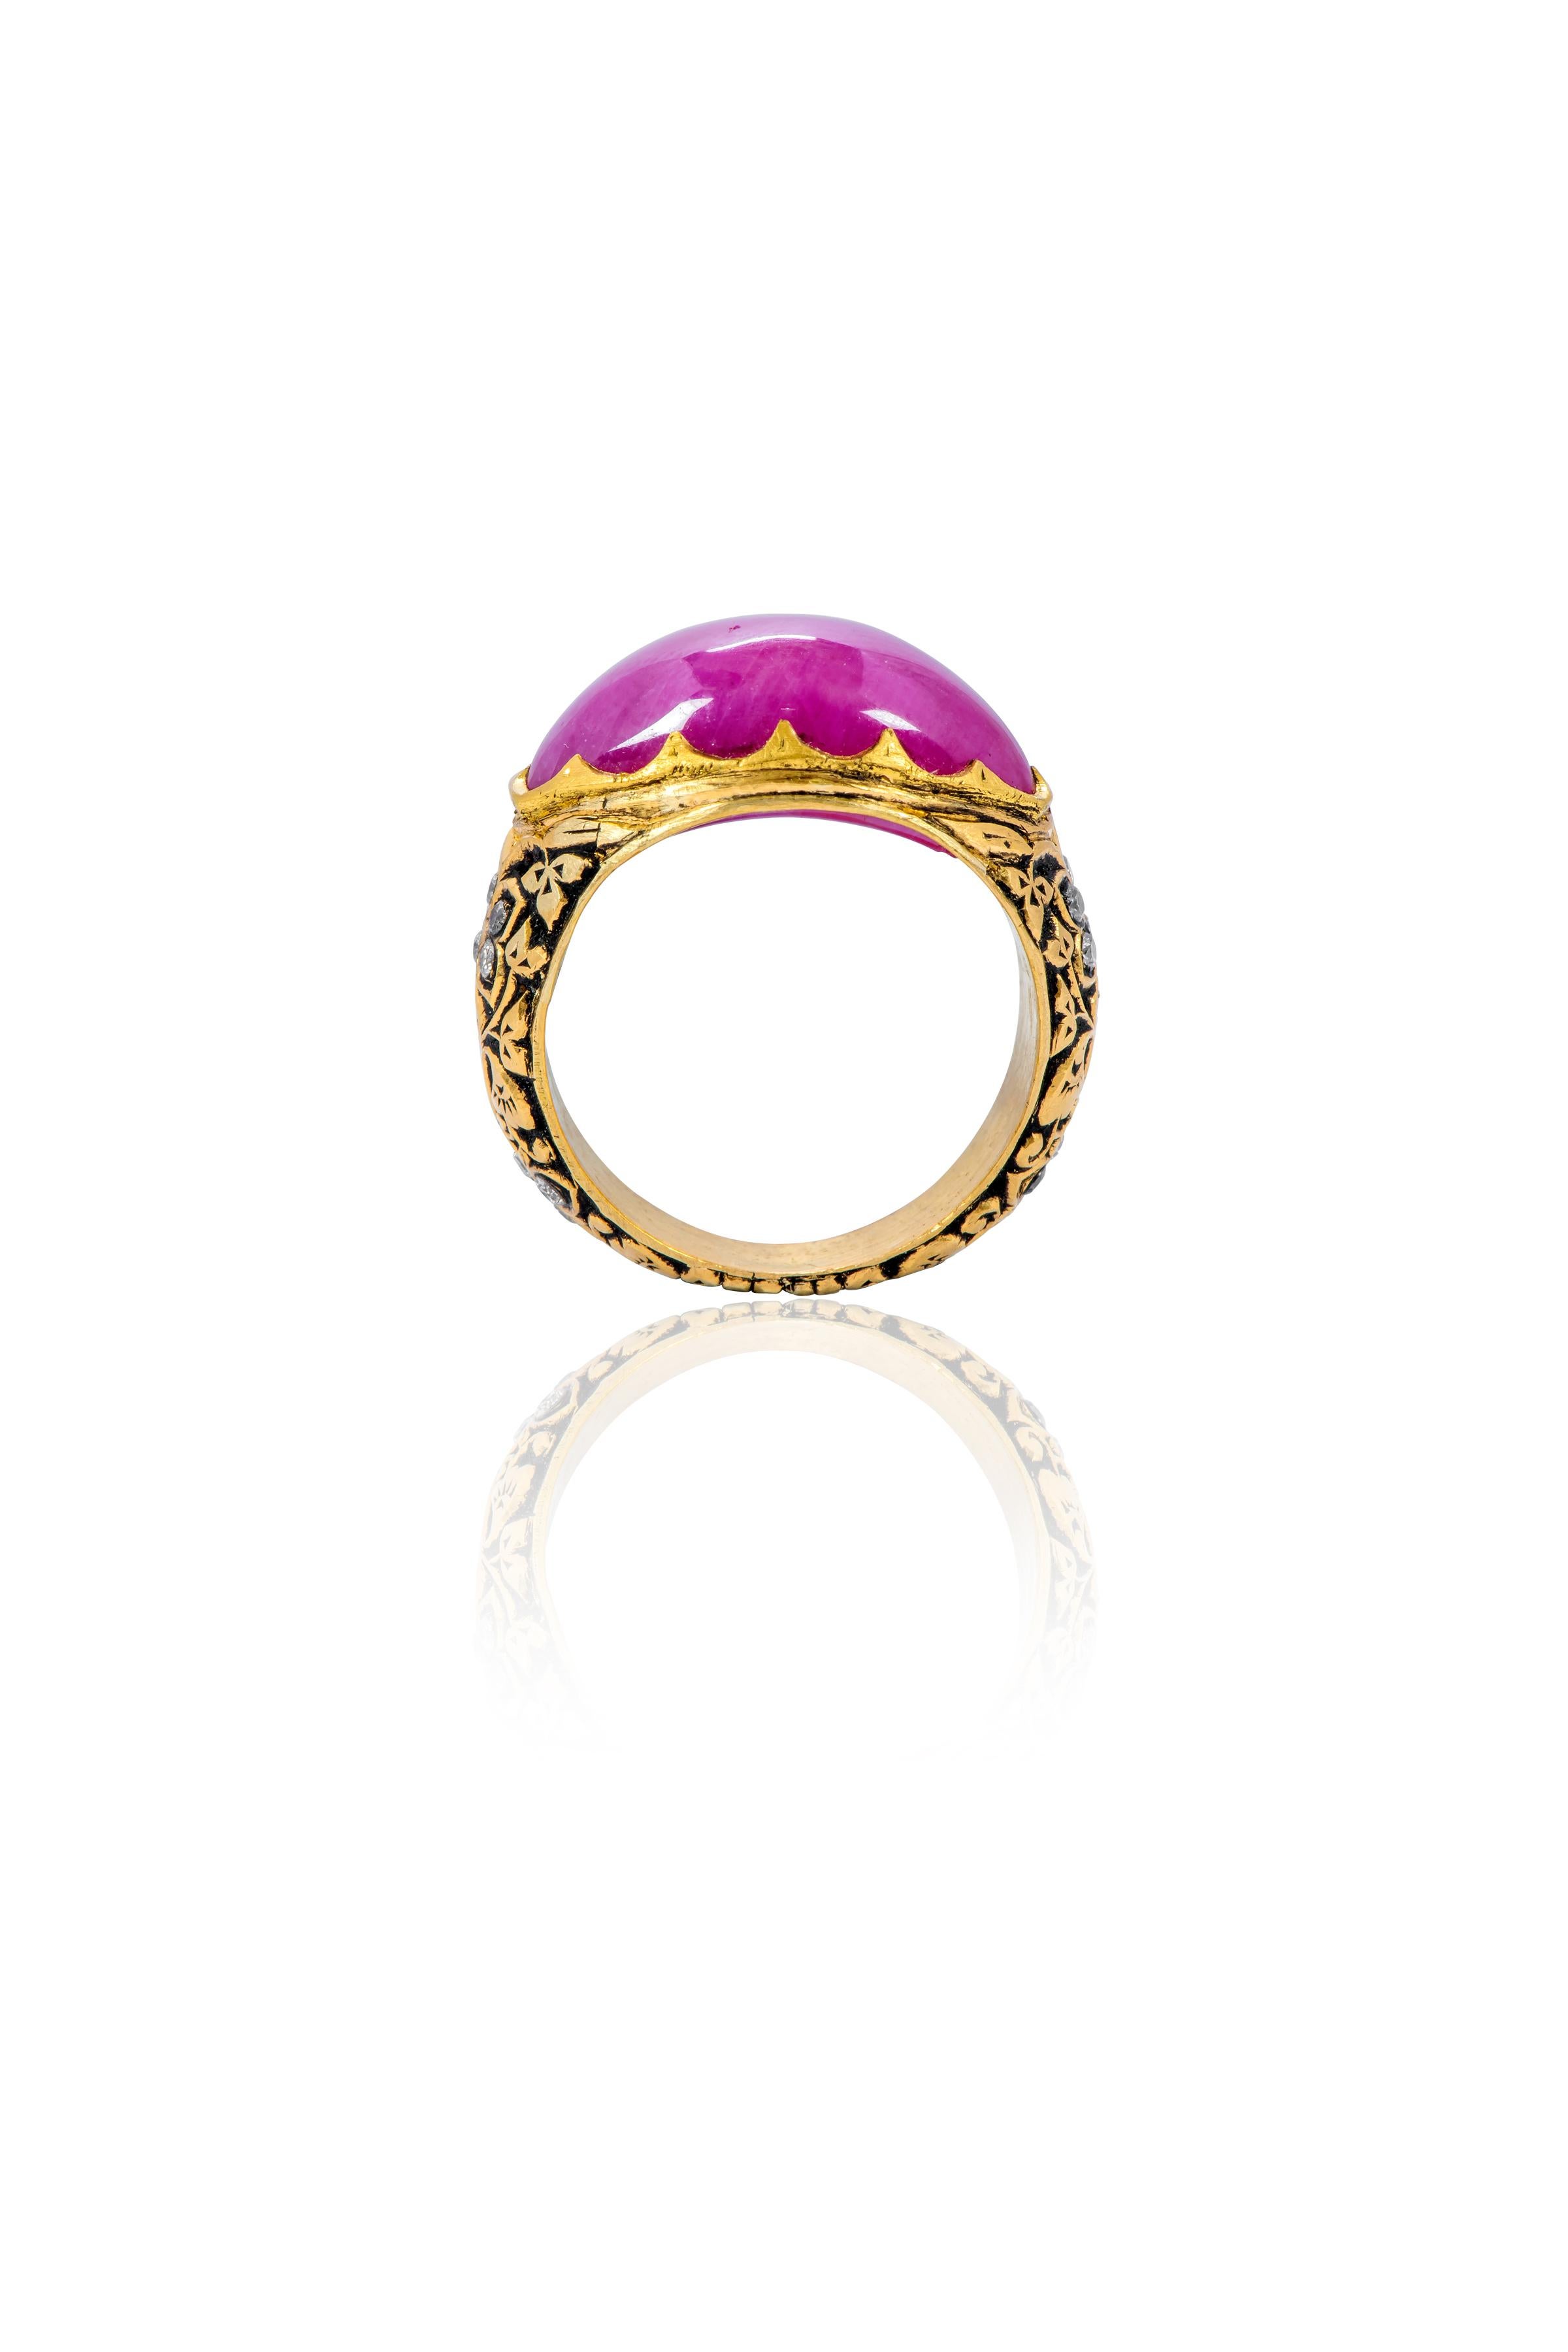 Women's 22 Karat Yellow Gold 14.85 Carat Cabochon Ruby and Diamond Ring For Sale